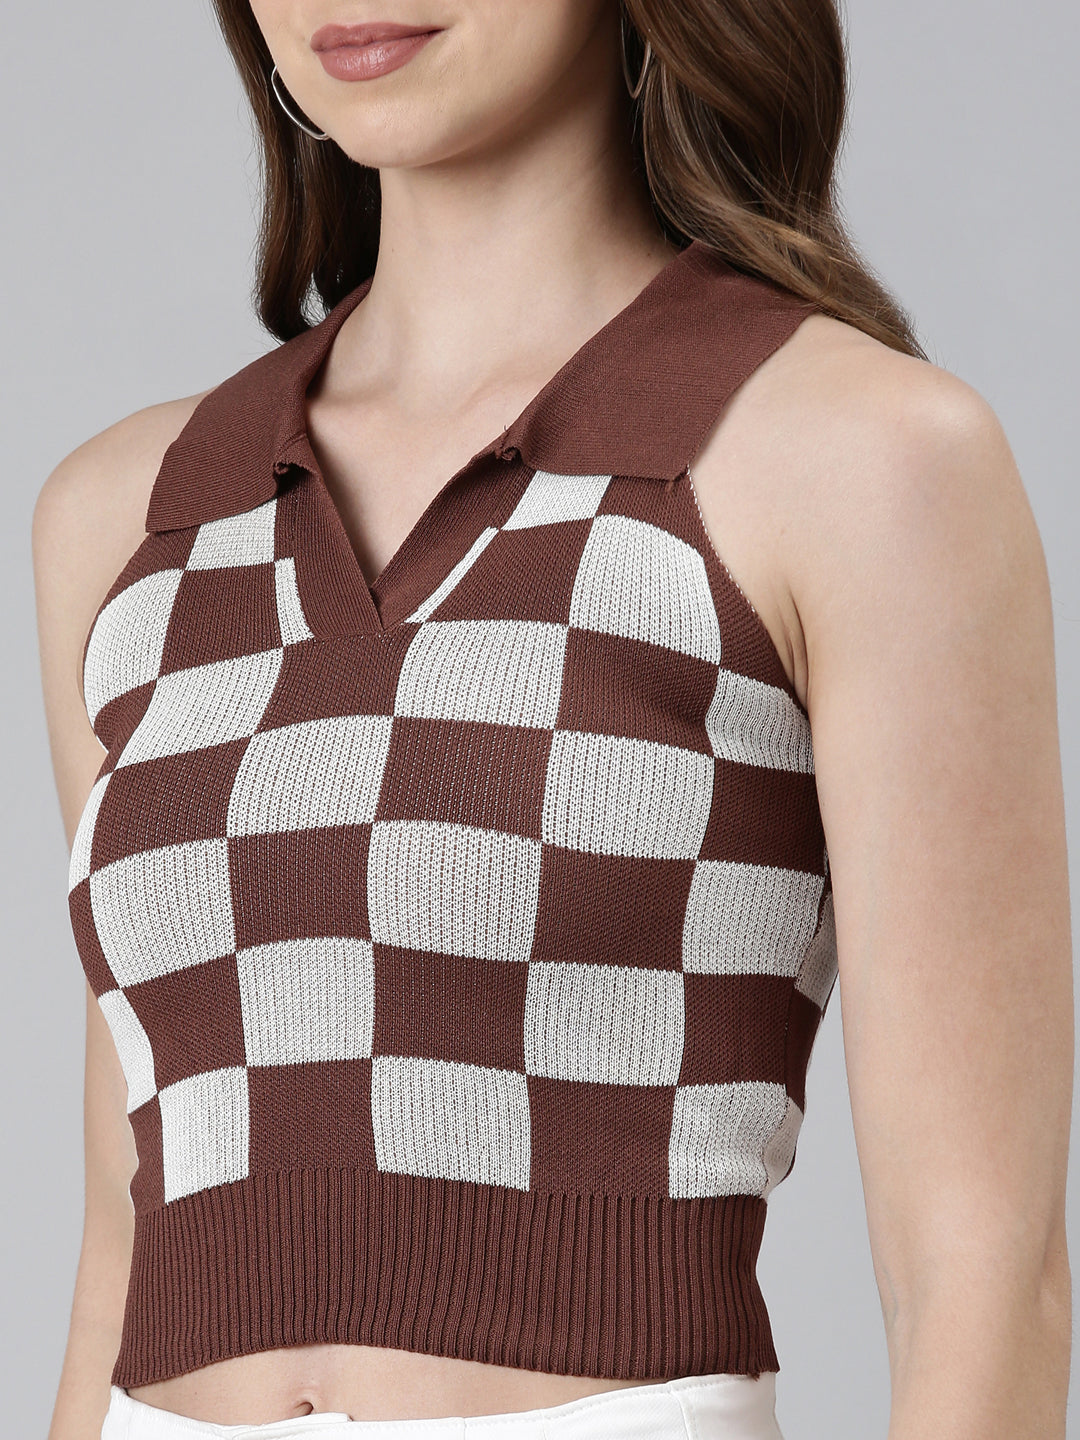 Above the Keyboard Collar Checked Coffee Brown Cinched Waist Crop Top